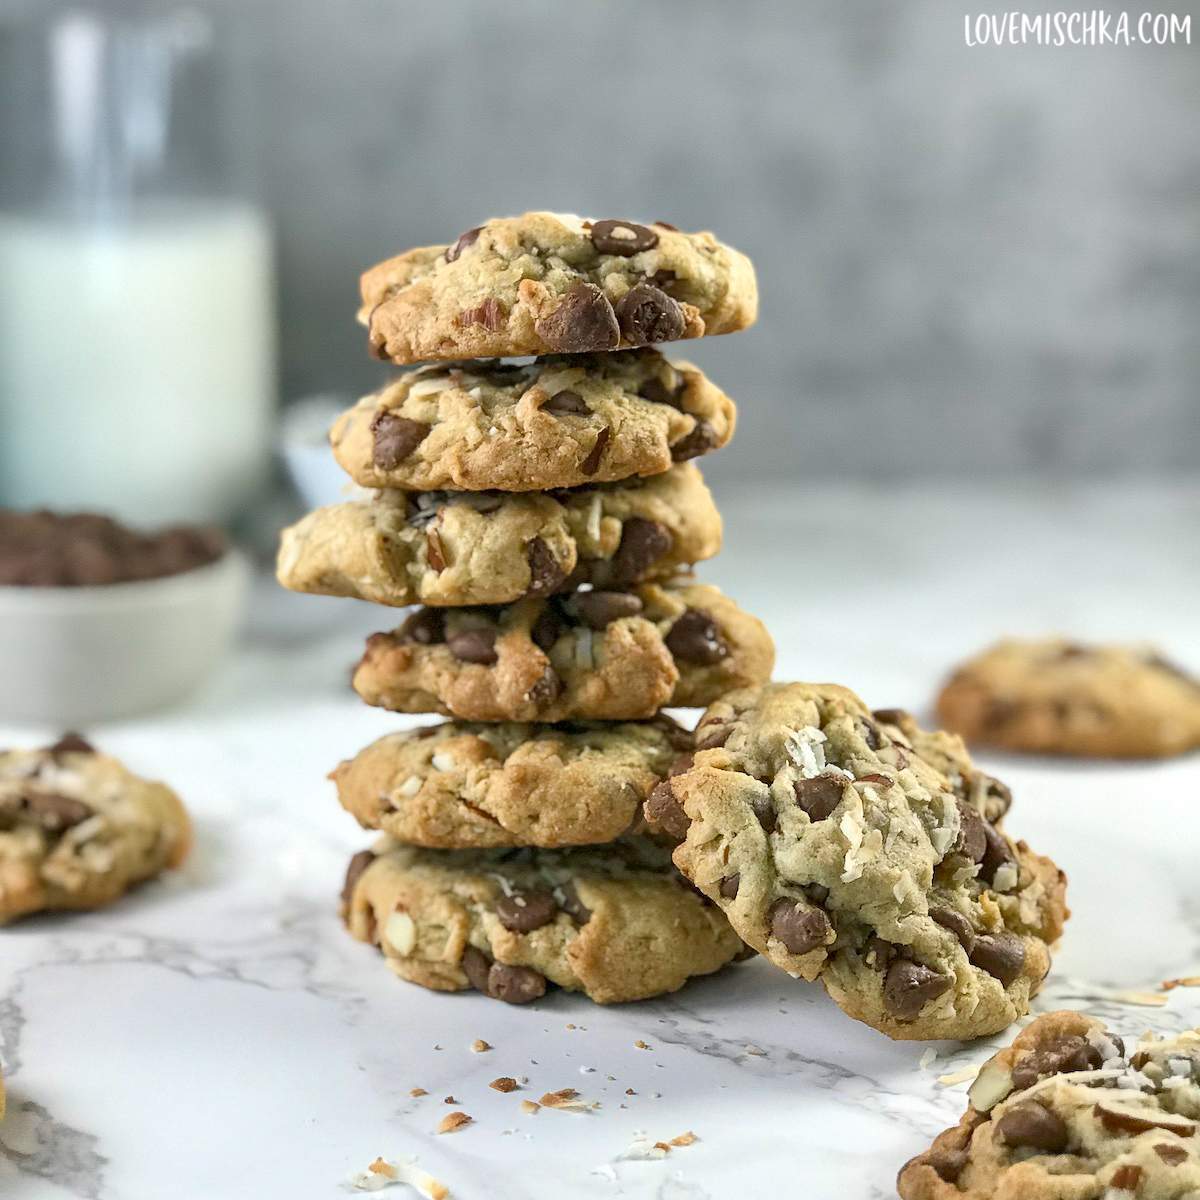 Almond Joy Cookies are stacked and laying on a marble counter top in this Almond Joy Cookie Recipe.